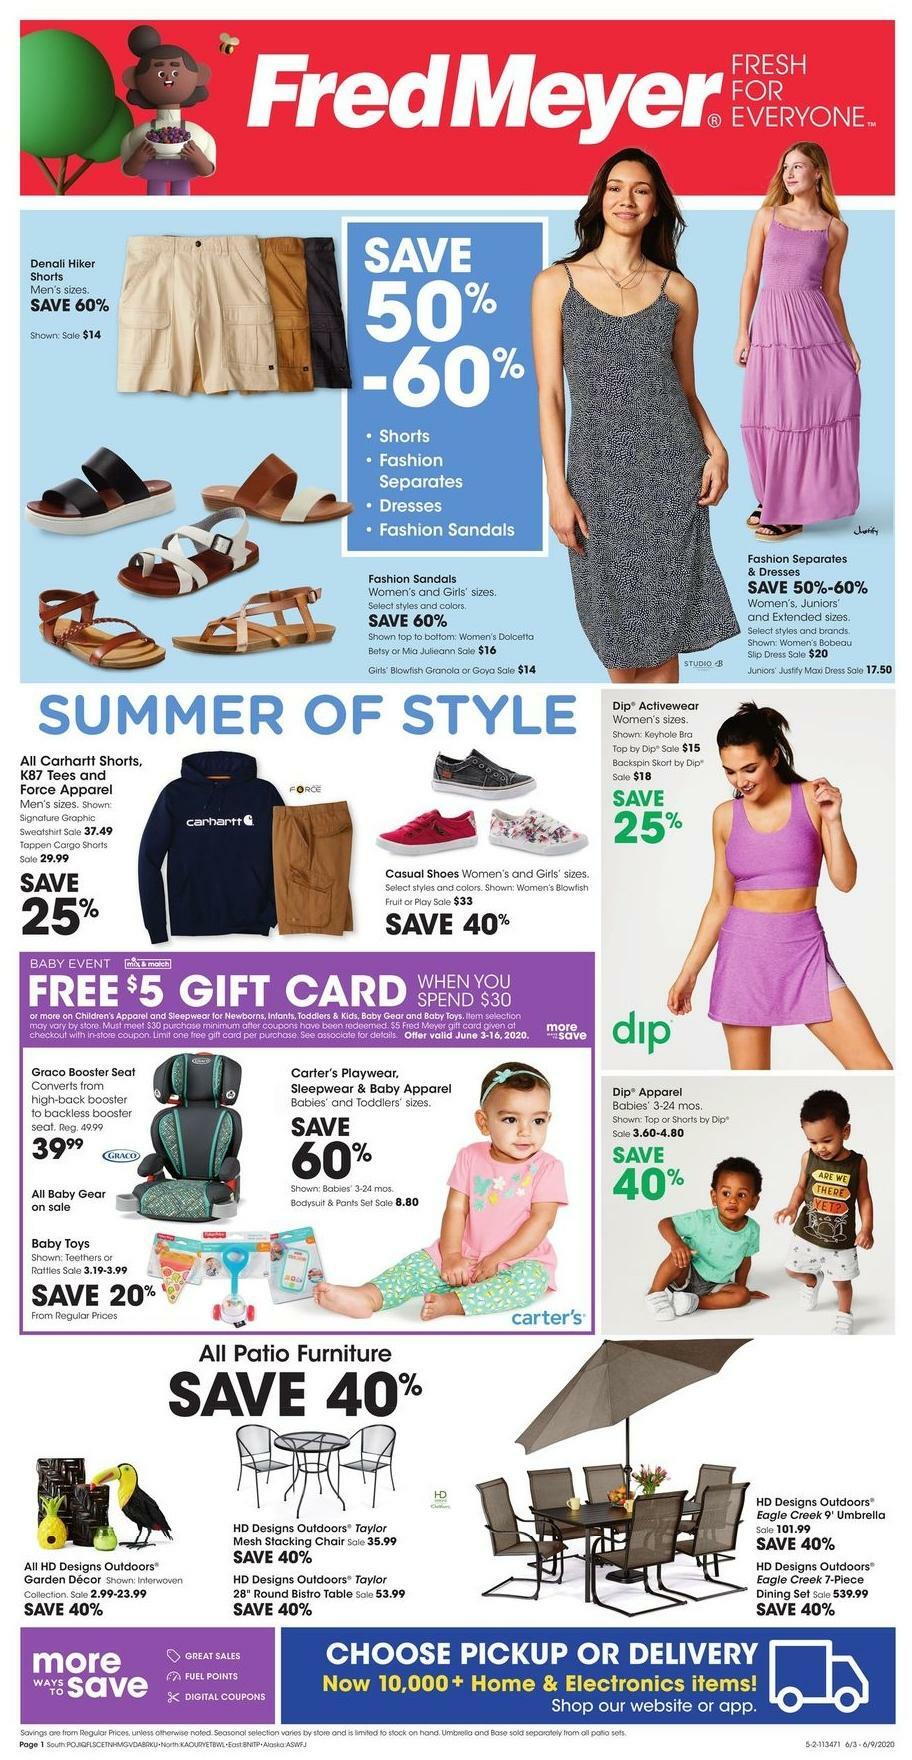 Fred Meyer General Merchandise Weekly Ad & Specials from June 3